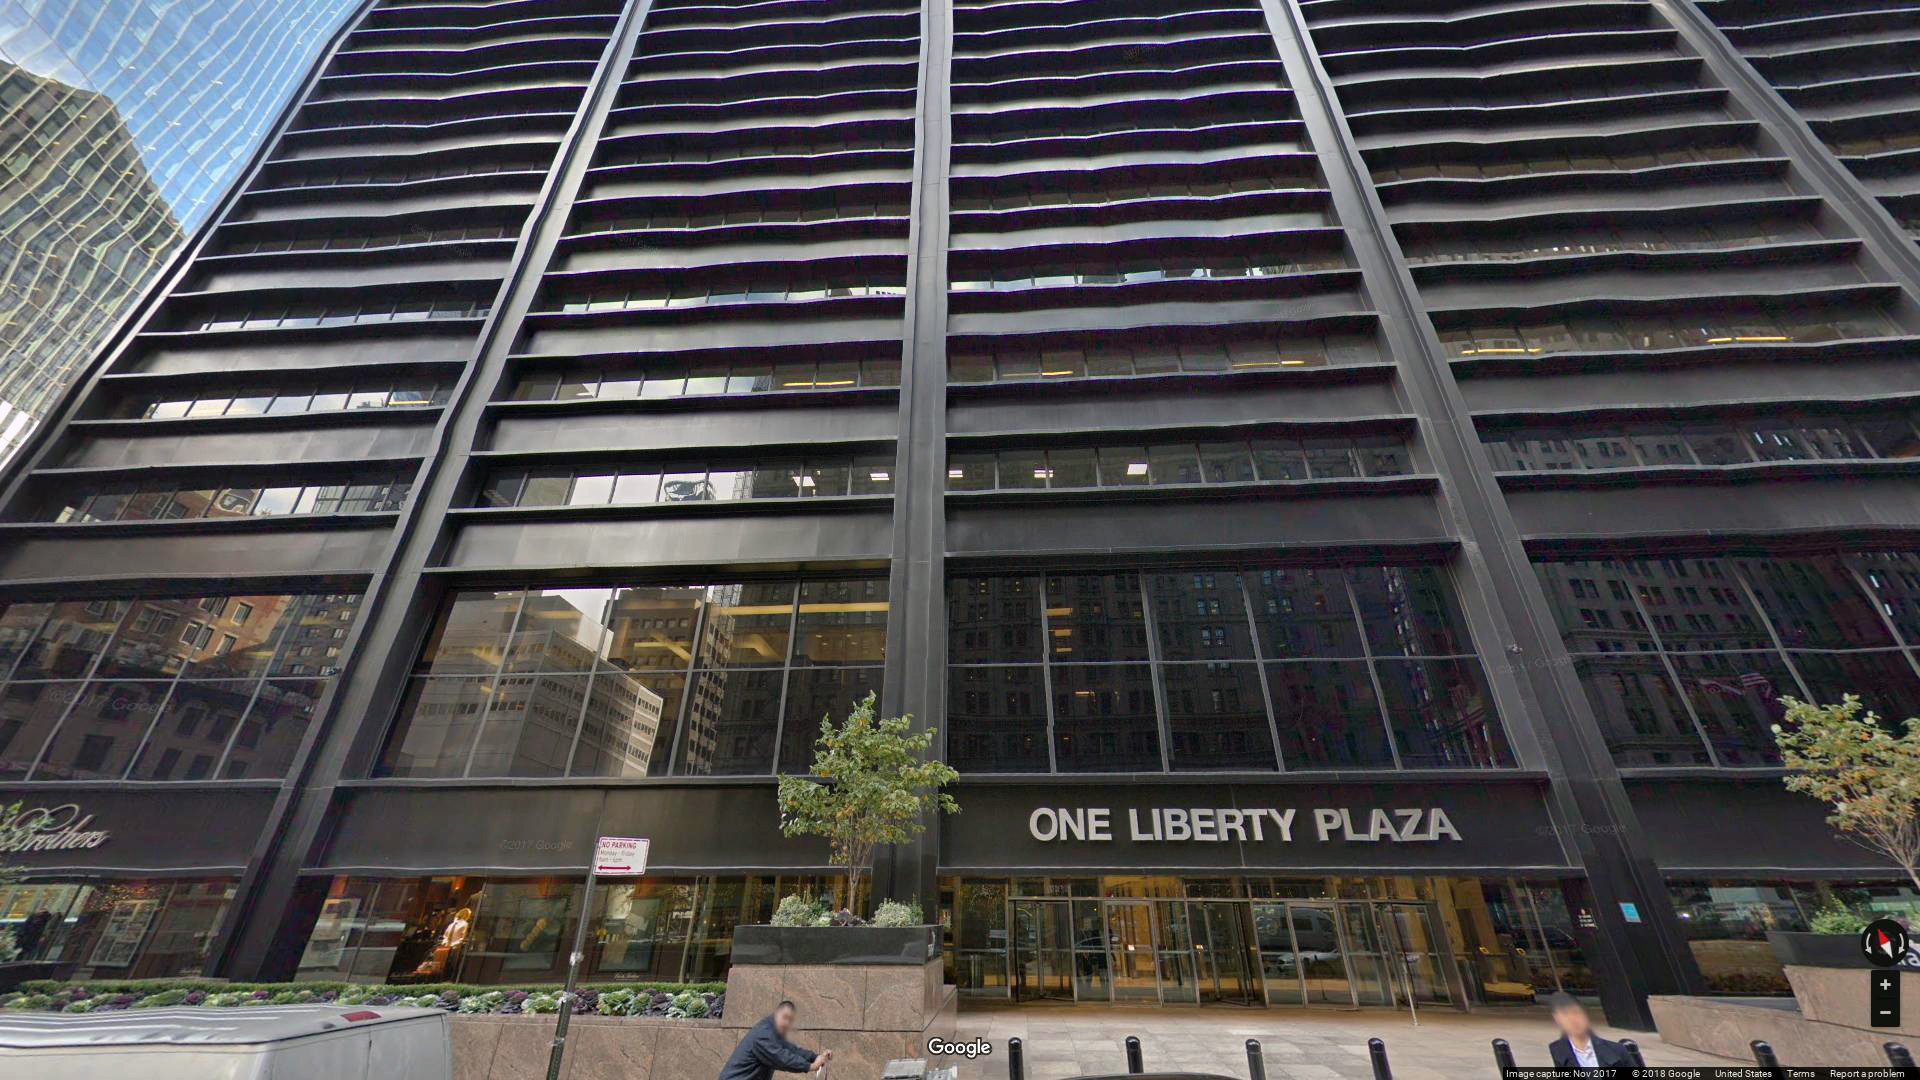 One Liberty Plaza building